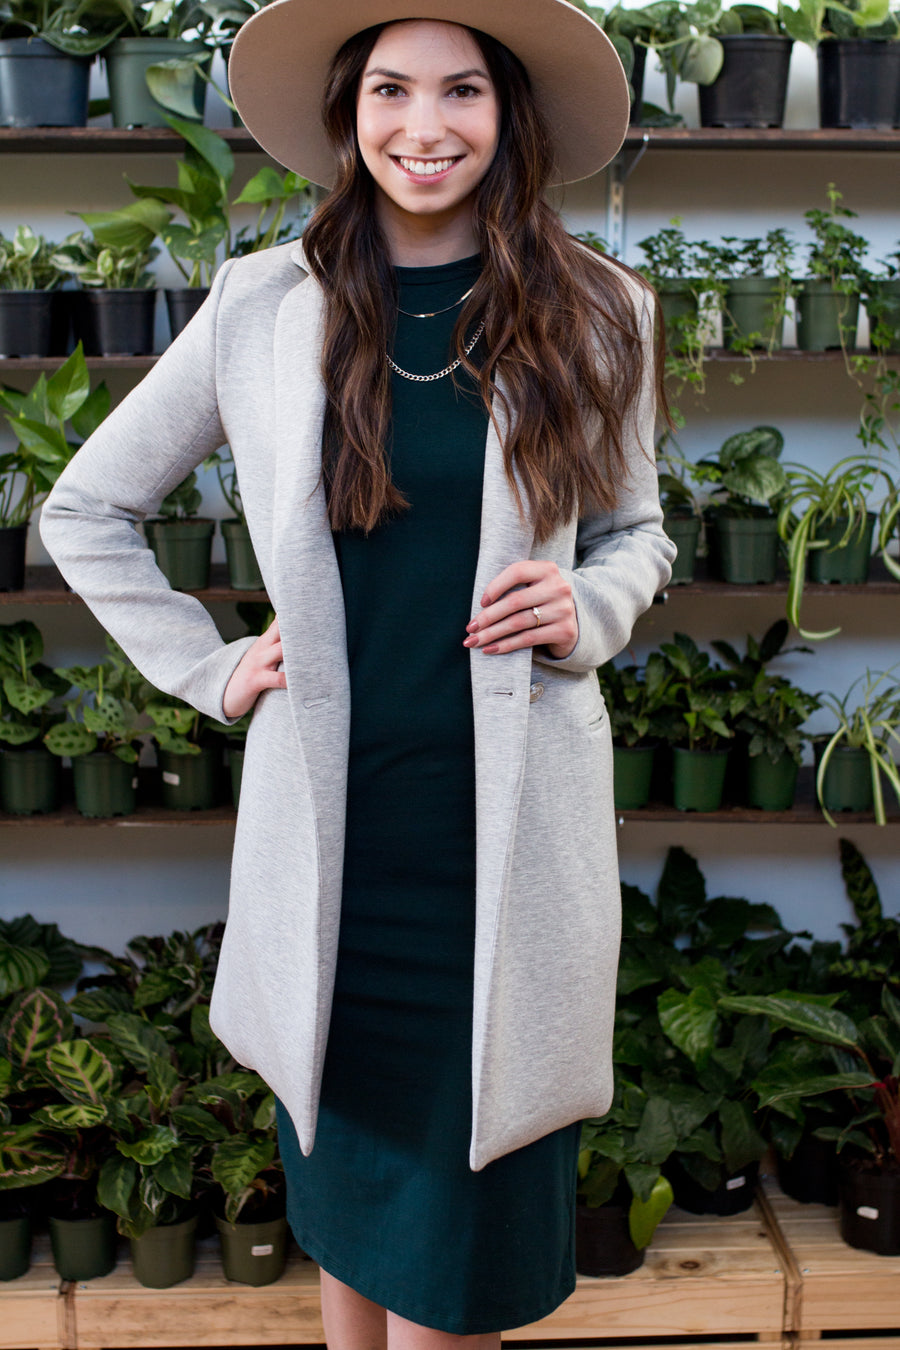 brunette woman wearing a green tank dress, a grey blazer, tan hat and a silver necklace in front of a wall of plants